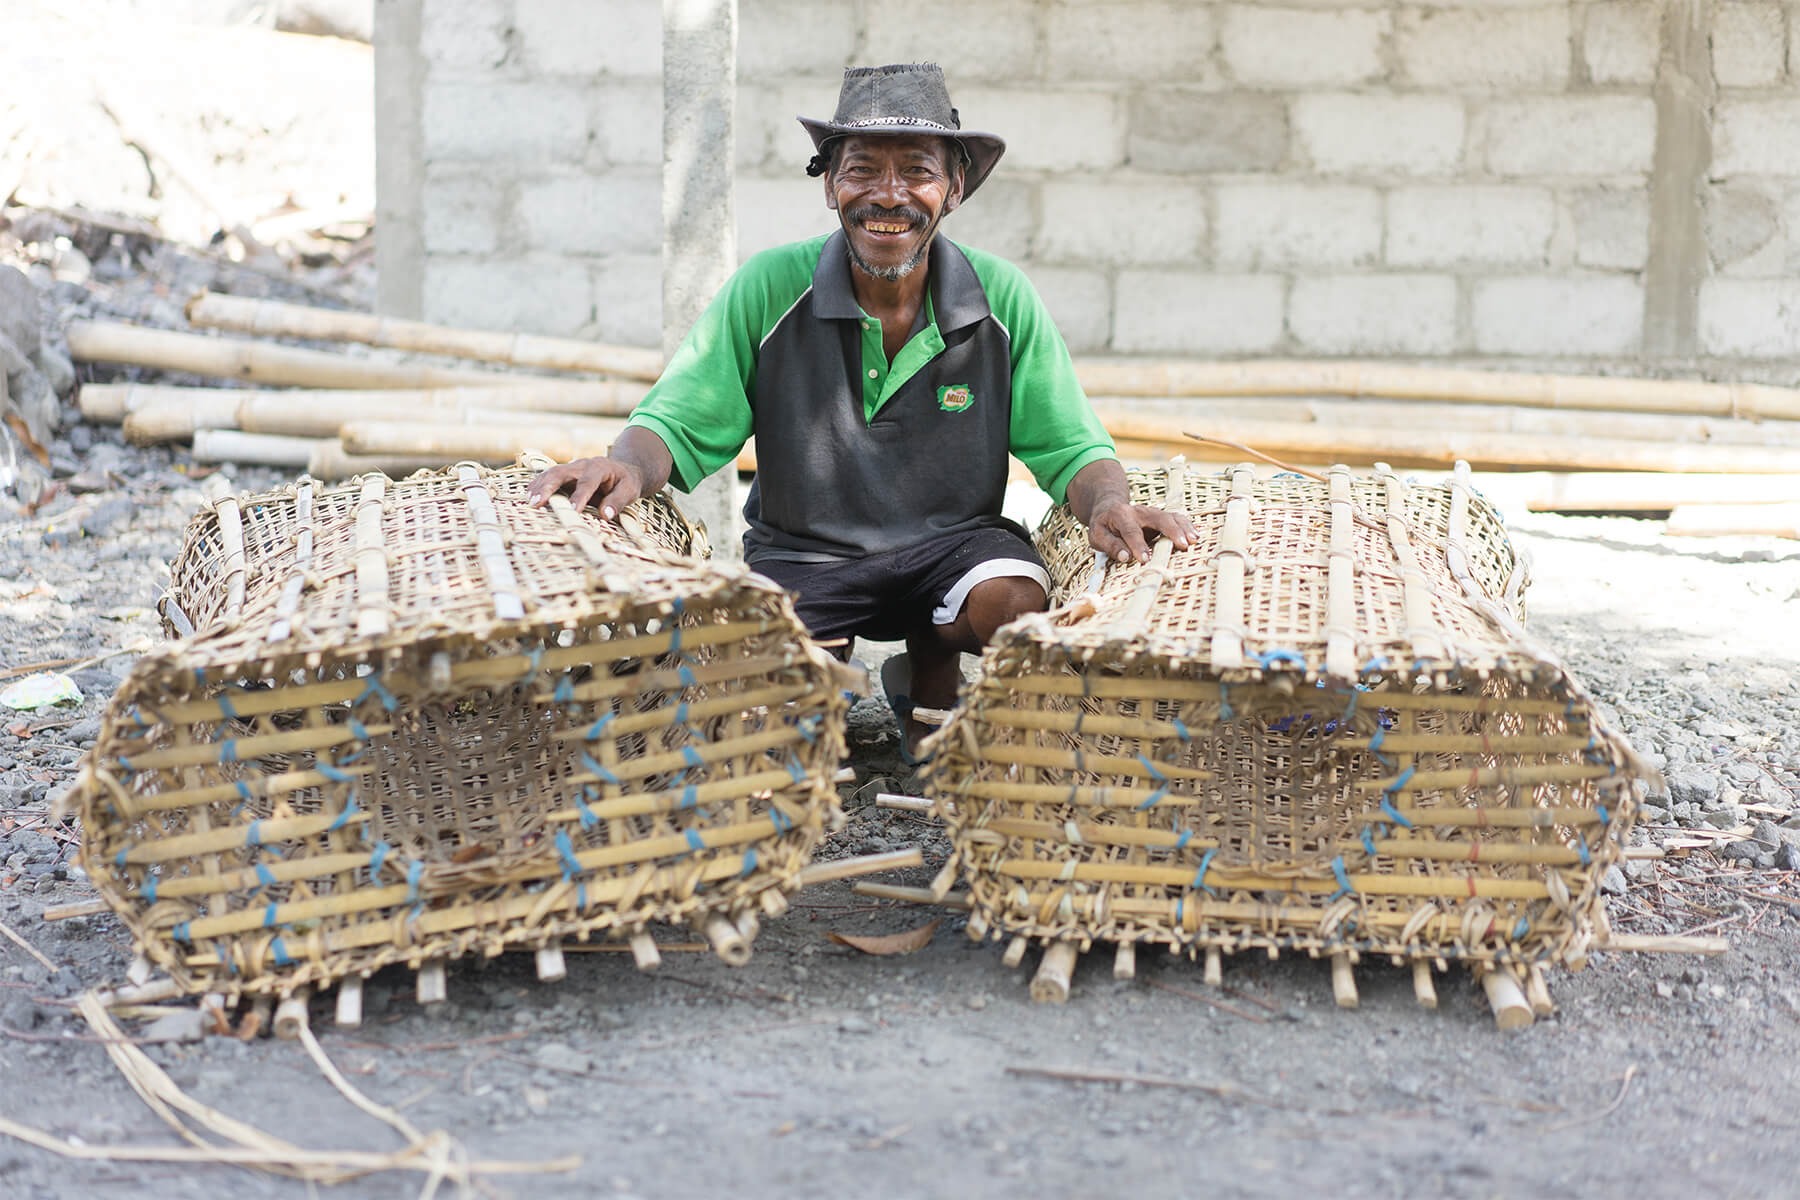 Antonio proudly shows his fishing baskets